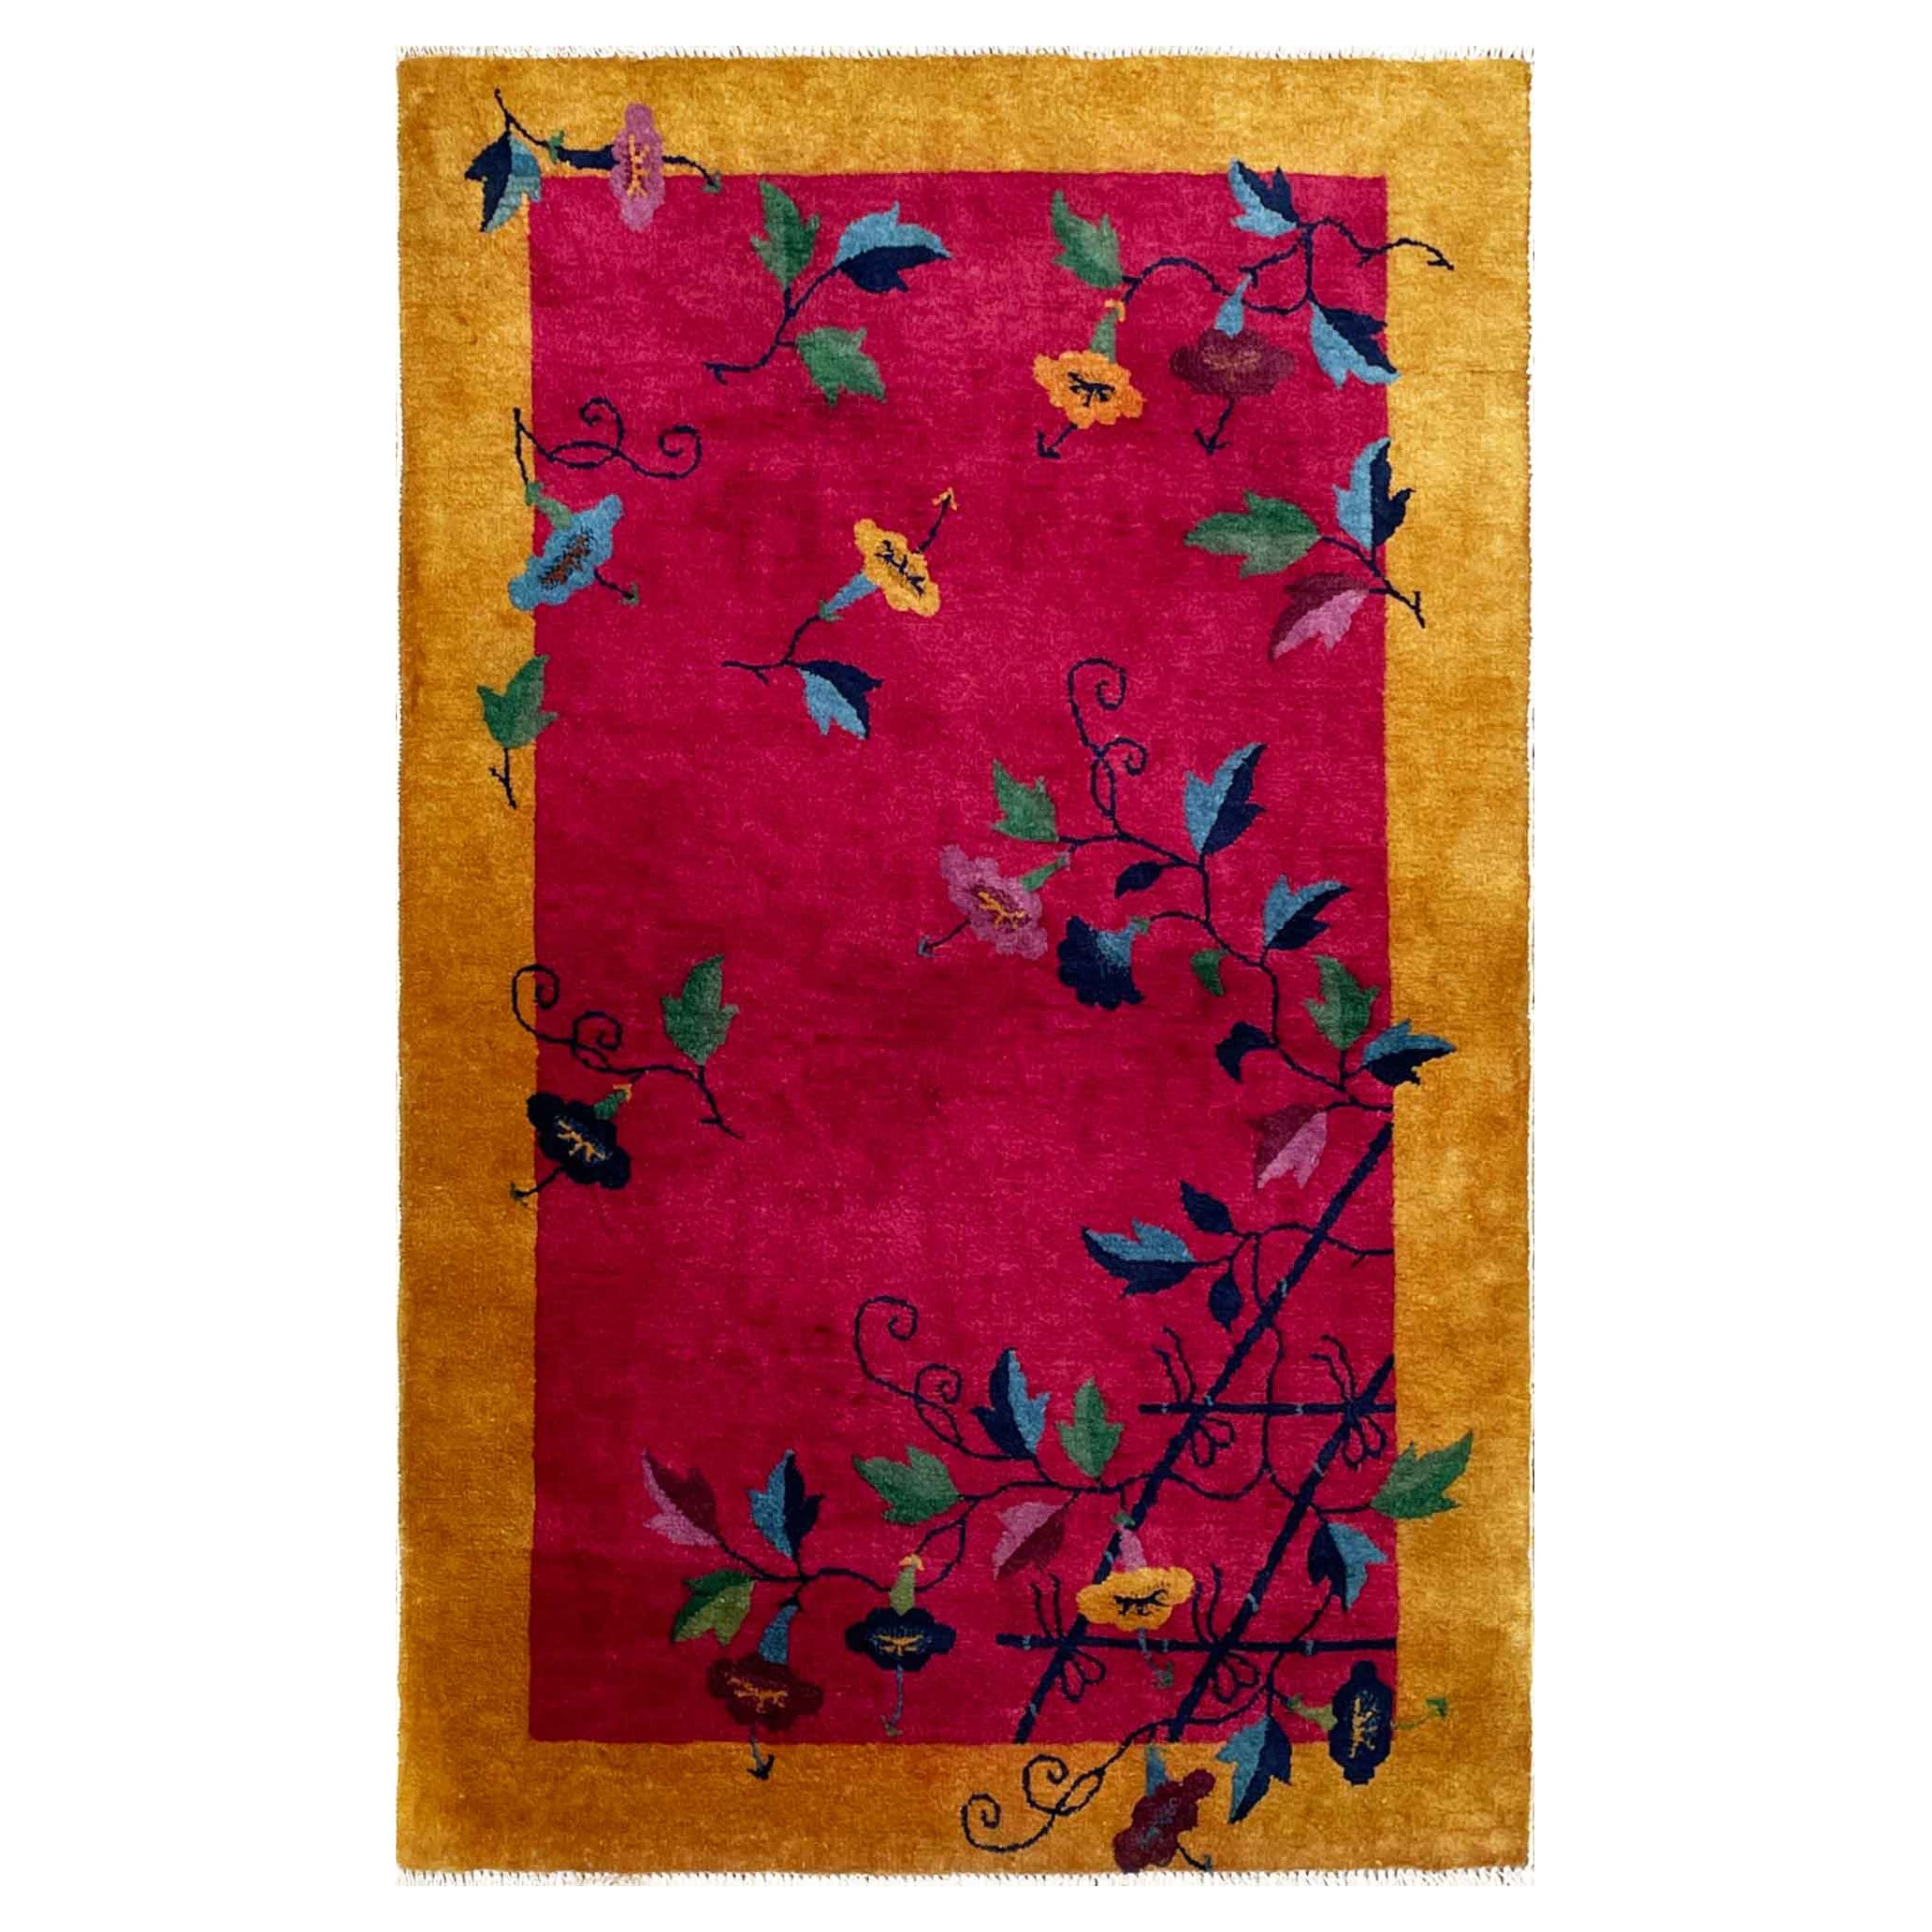 Antique Art Deco Chinese Rug, Flower lovers, 3'1" x 4'10" #17451, c-1920's For Sale